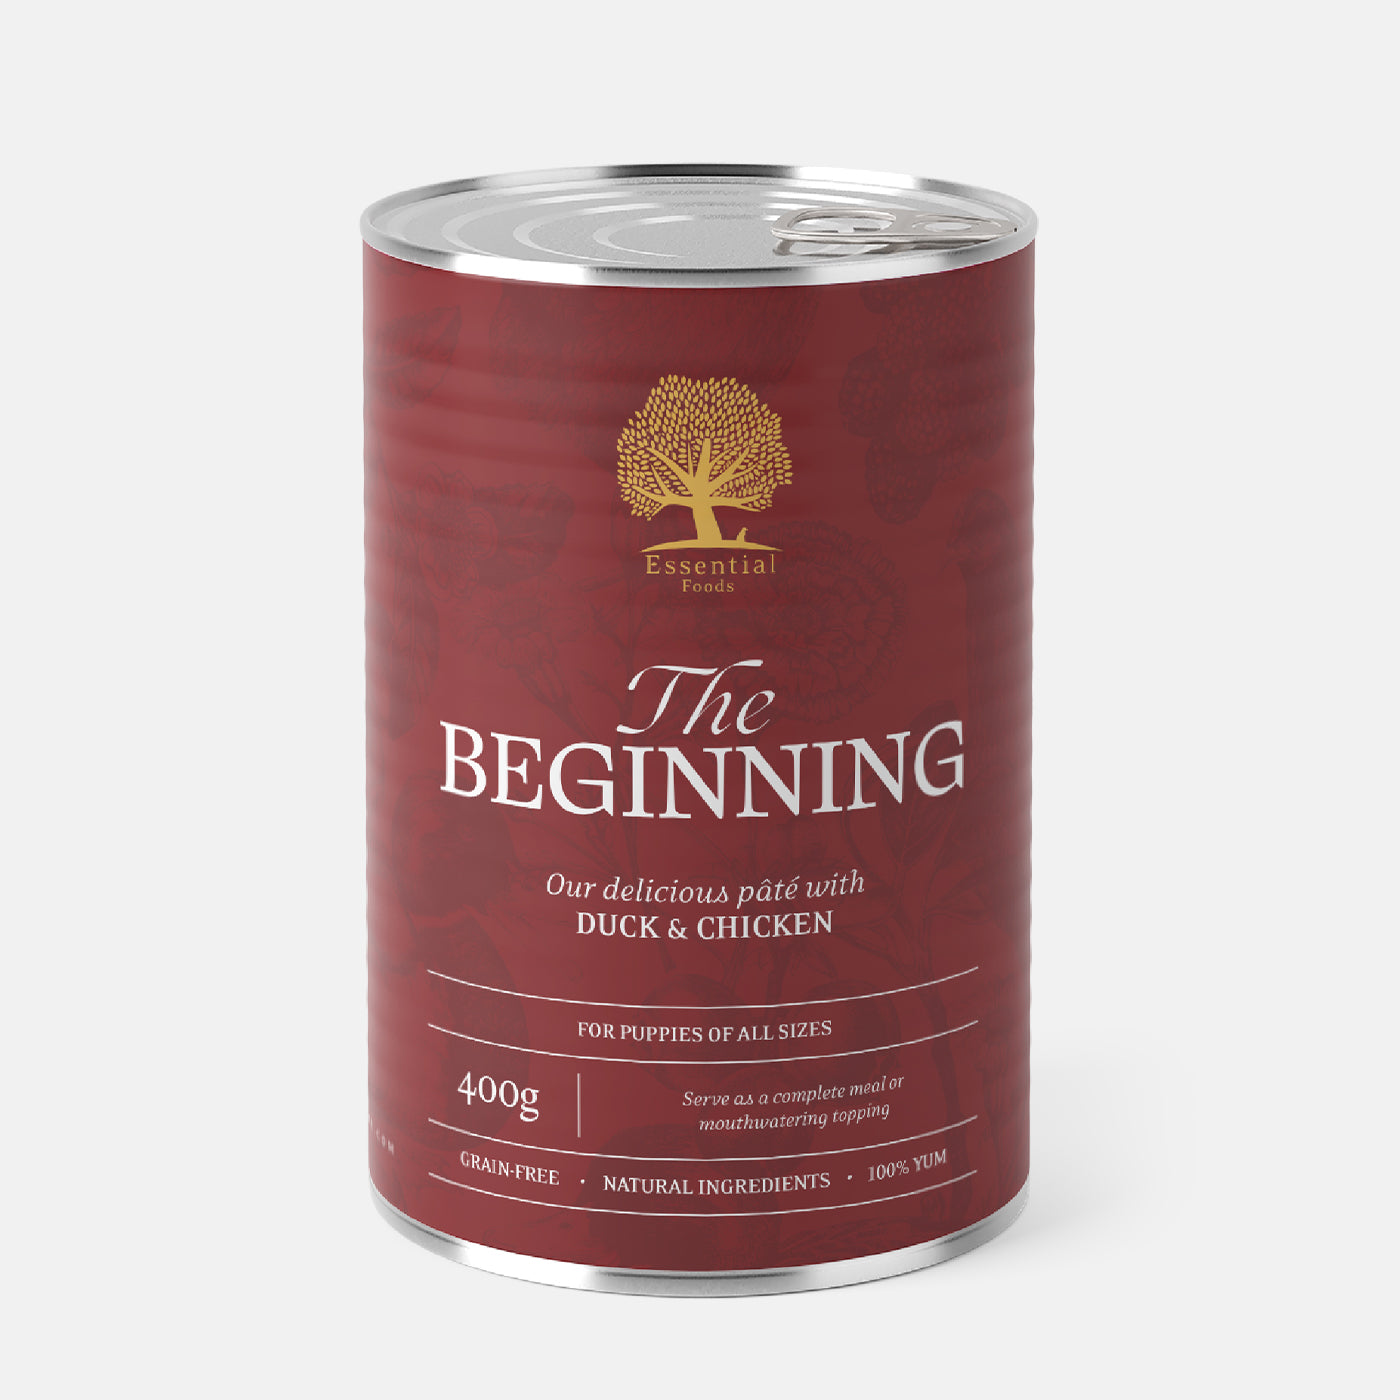 Essential Foods The Beginning Pate Dog Food 400g